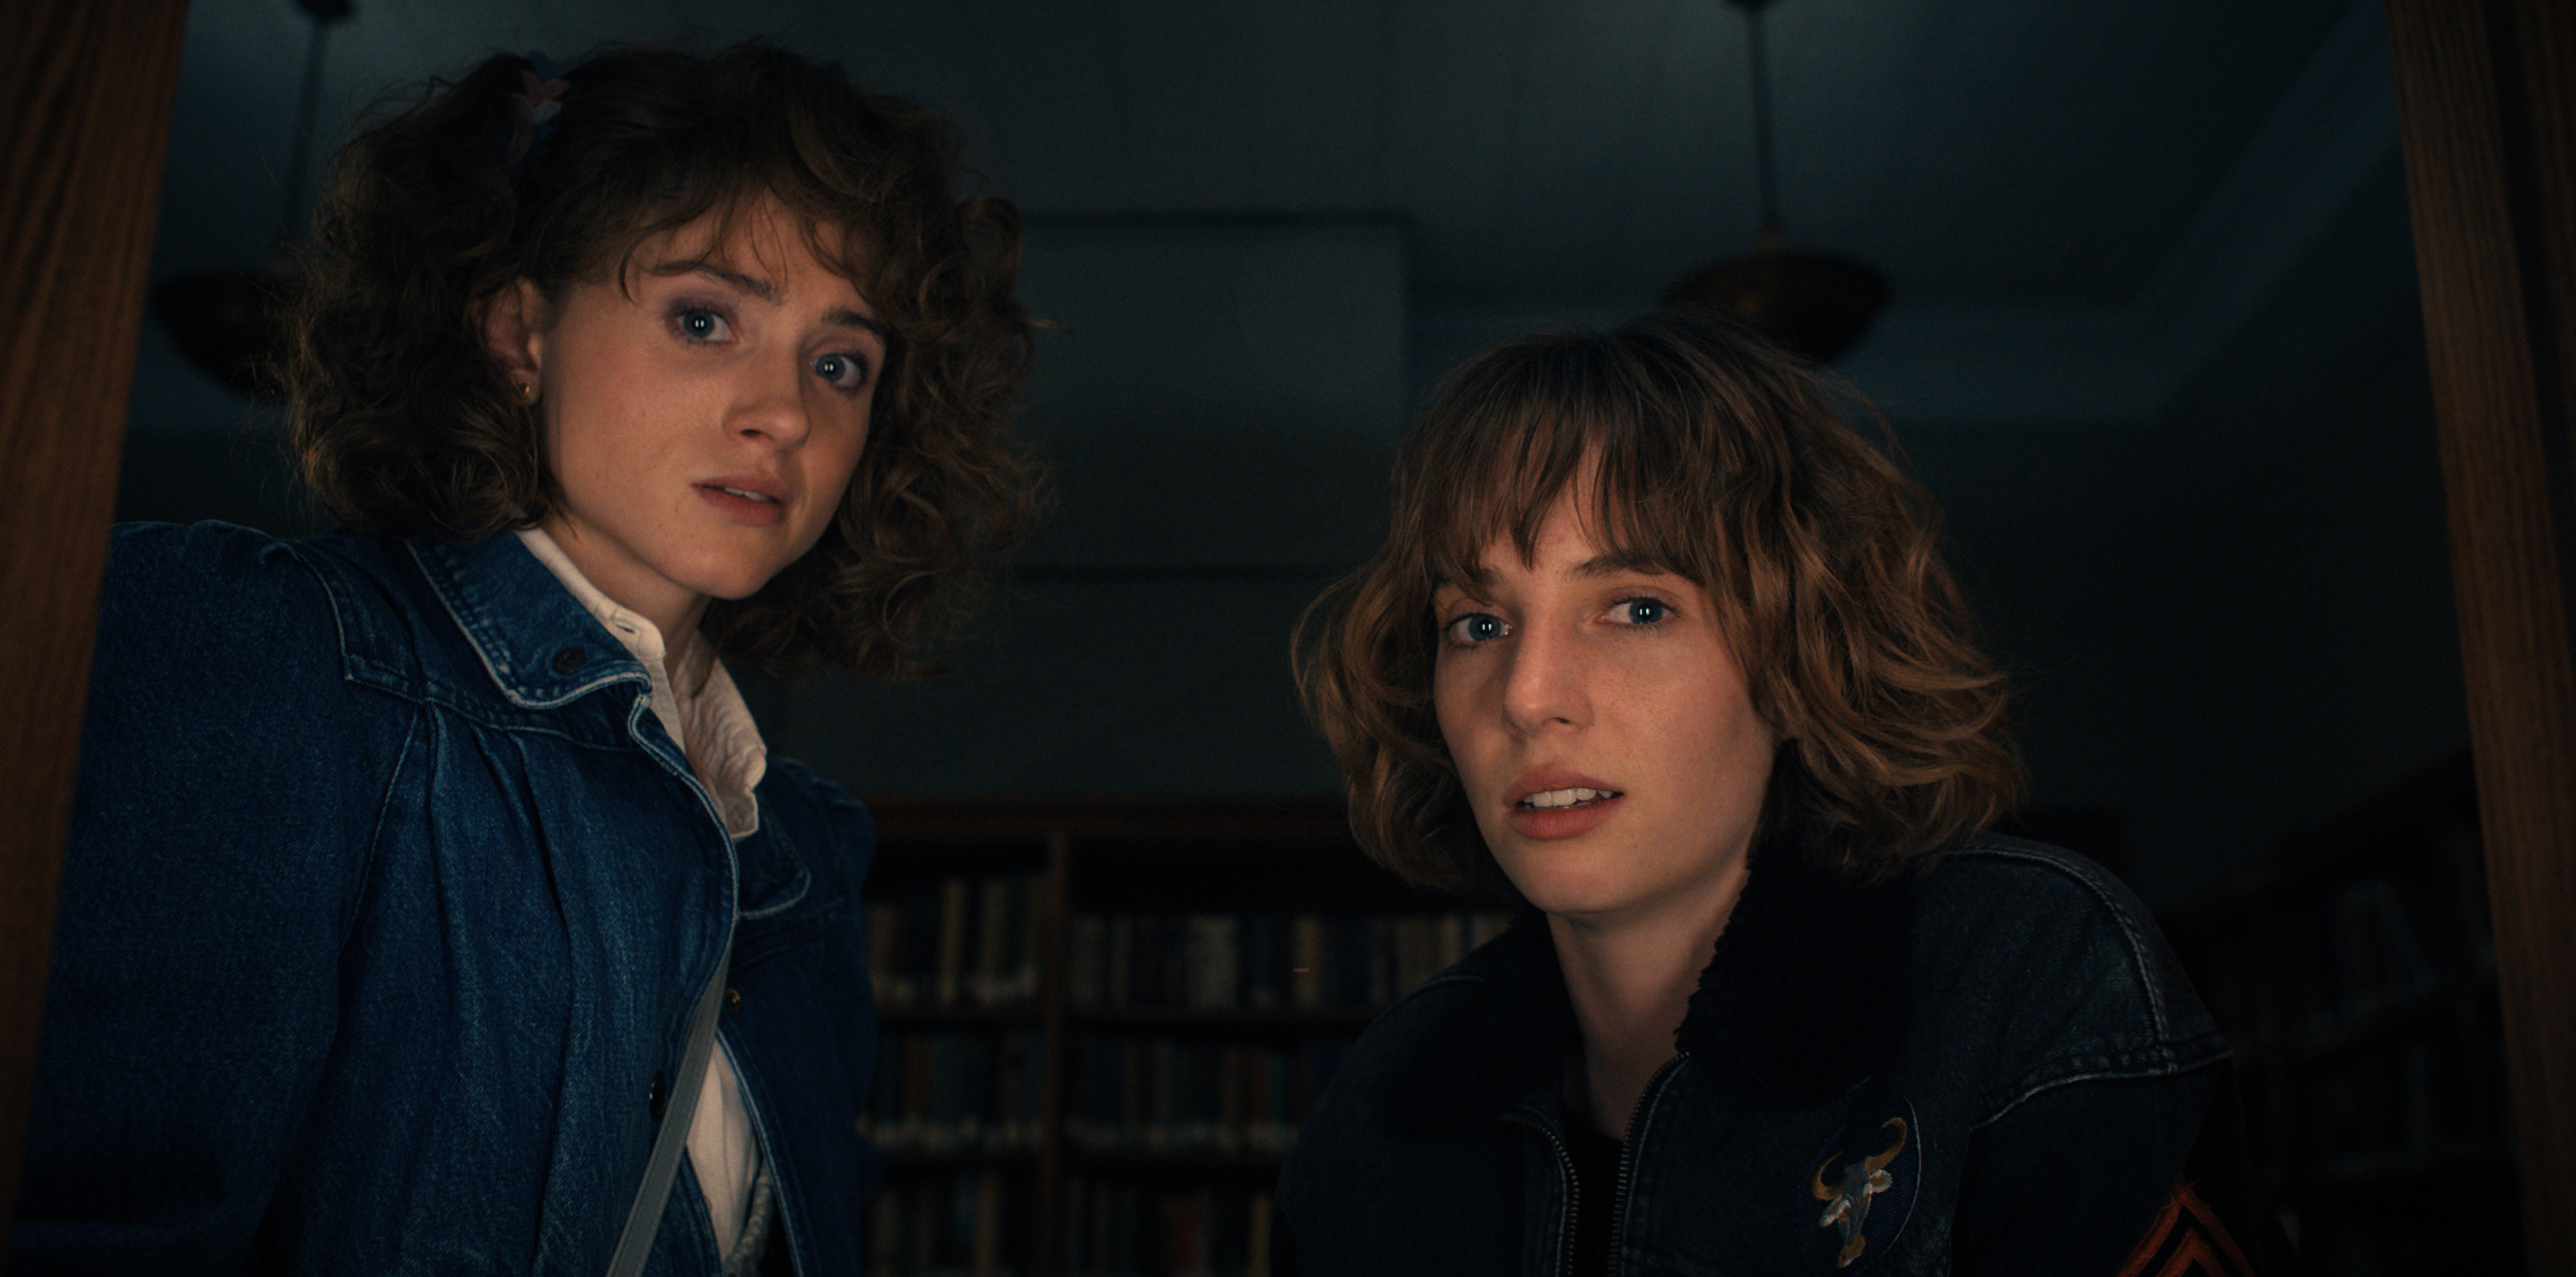 Stranger Things' Season 4 Vol. 2: Release date and time, episode